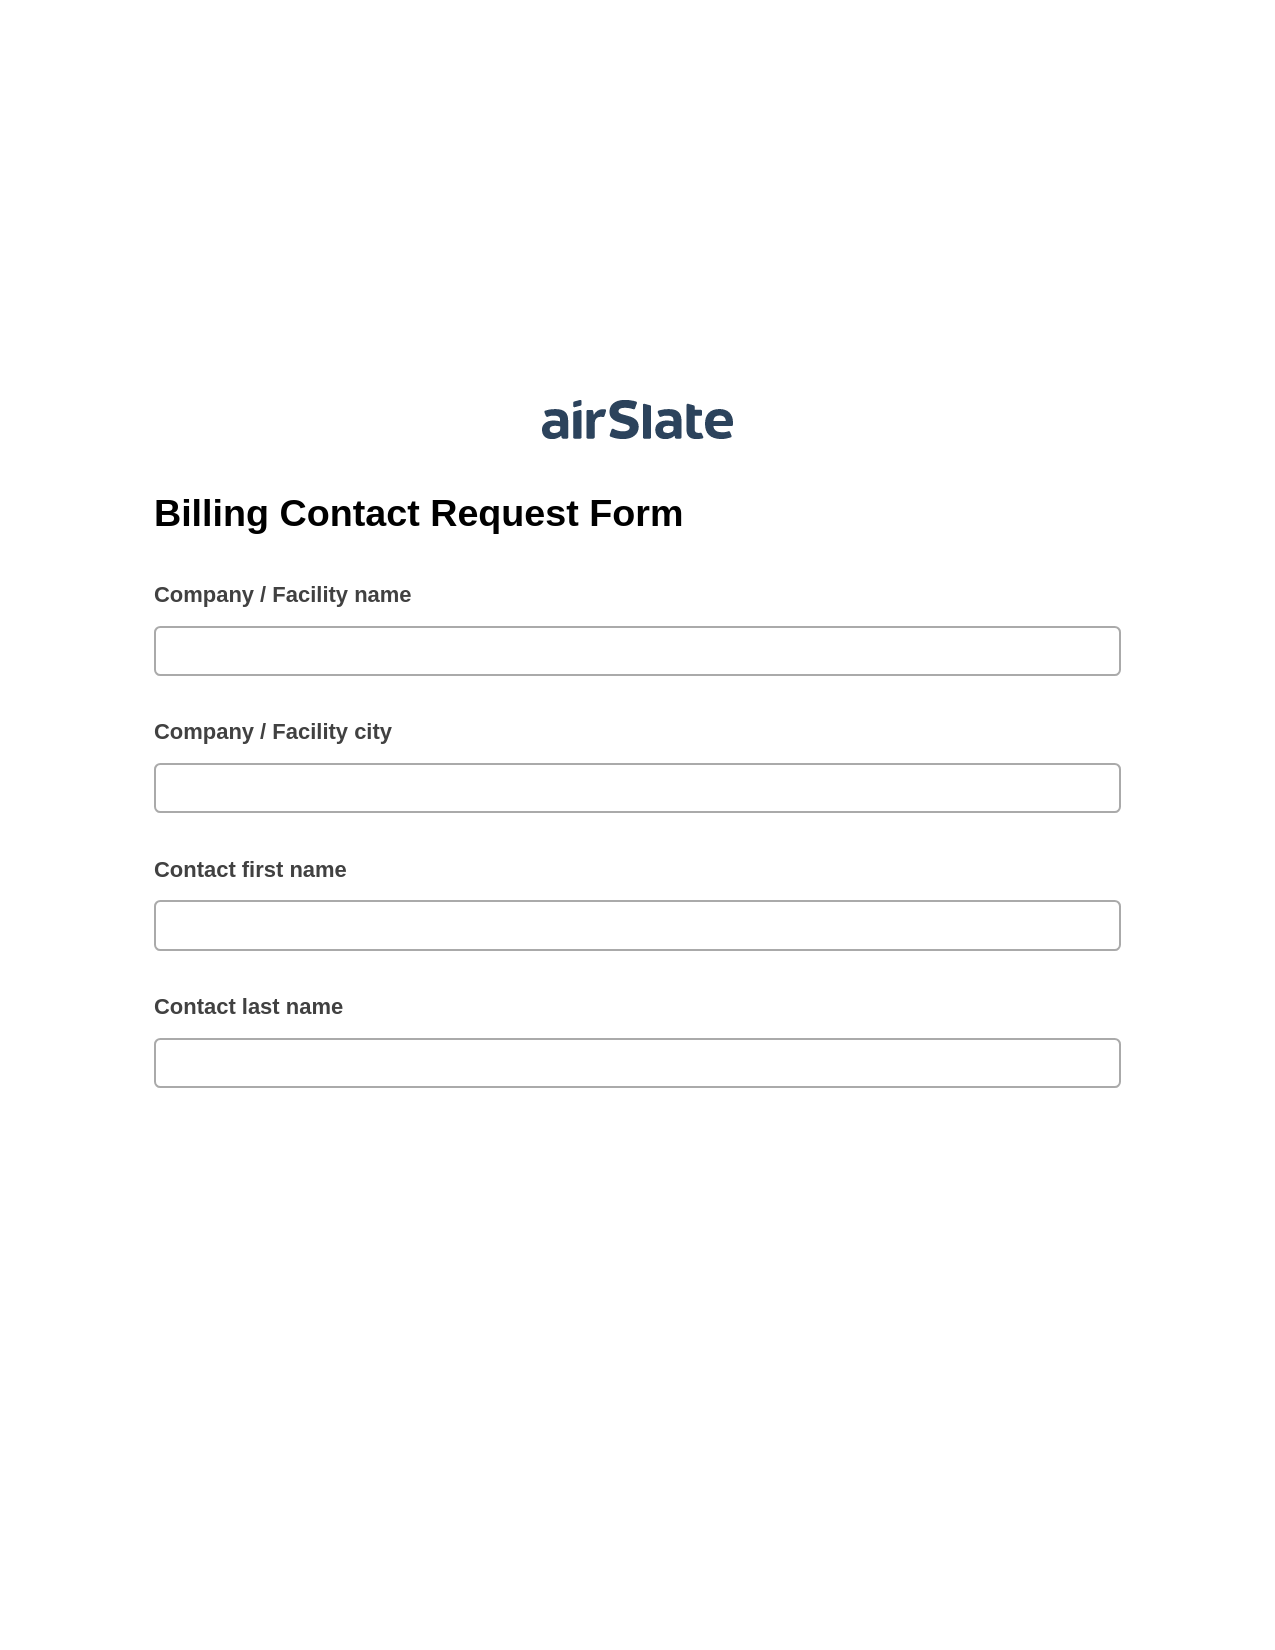 Multirole Billing Contact Request Form Pre-fill from Google Sheets Bot, Export to MS Dynamics 365 Bot, Archive to SharePoint Folder Bot